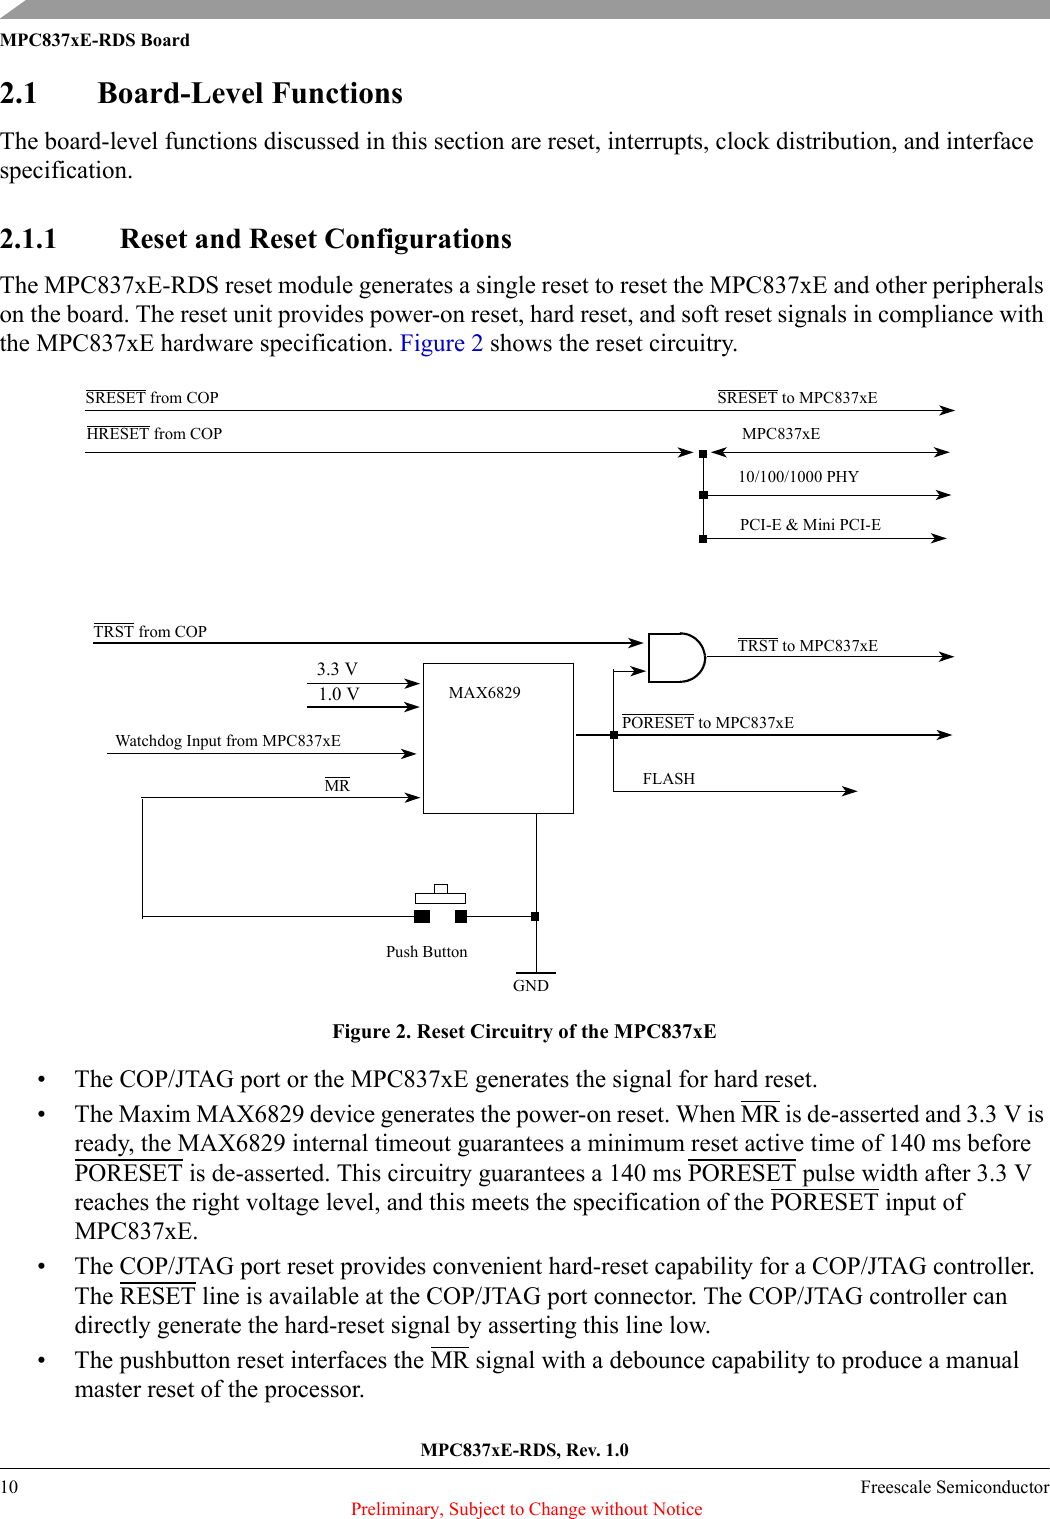 MPC837xE-RDS, Rev. 1.010 Freescale Semiconductor Preliminary, Subject to Change without NoticeMPC837xE-RDS Board2.1 Board-Level FunctionsThe board-level functions discussed in this section are reset, interrupts, clock distribution, and interface specification.2.1.1 Reset and Reset ConfigurationsThe MPC837xE-RDS reset module generates a single reset to reset the MPC837xE and other peripherals on the board. The reset unit provides power-on reset, hard reset, and soft reset signals in compliance with the MPC837xE hardware specification. Figure 2 shows the reset circuitry.Figure 2. Reset Circuitry of the MPC837xE• The COP/JTAG port or the MPC837xE generates the signal for hard reset.• The Maxim MAX6829 device generates the power-on reset. When MR is de-asserted and 3.3 V is ready, the MAX6829 internal timeout guarantees a minimum reset active time of 140 ms before PORESET is de-asserted. This circuitry guarantees a 140 ms PORESET pulse width after 3.3 V reaches the right voltage level, and this meets the specification of the PORESET input of MPC837xE.• The COP/JTAG port reset provides convenient hard-reset capability for a COP/JTAG controller. The RESET line is available at the COP/JTAG port connector. The COP/JTAG controller can directly generate the hard-reset signal by asserting this line low.• The pushbutton reset interfaces the MR signal with a debounce capability to produce a manual master reset of the processor.MAX68293.3 V Push ButtonHRESET from COPSRESET from COPTRST from COPSRESET to MPC837xEPORESET to MPC837xEFLASH10/100/1000 PHYMPC837xETRST to MPC837xEGND1.0 VMRWatchdog Input from MPC837xEPCI-E &amp; Mini PCI-E 